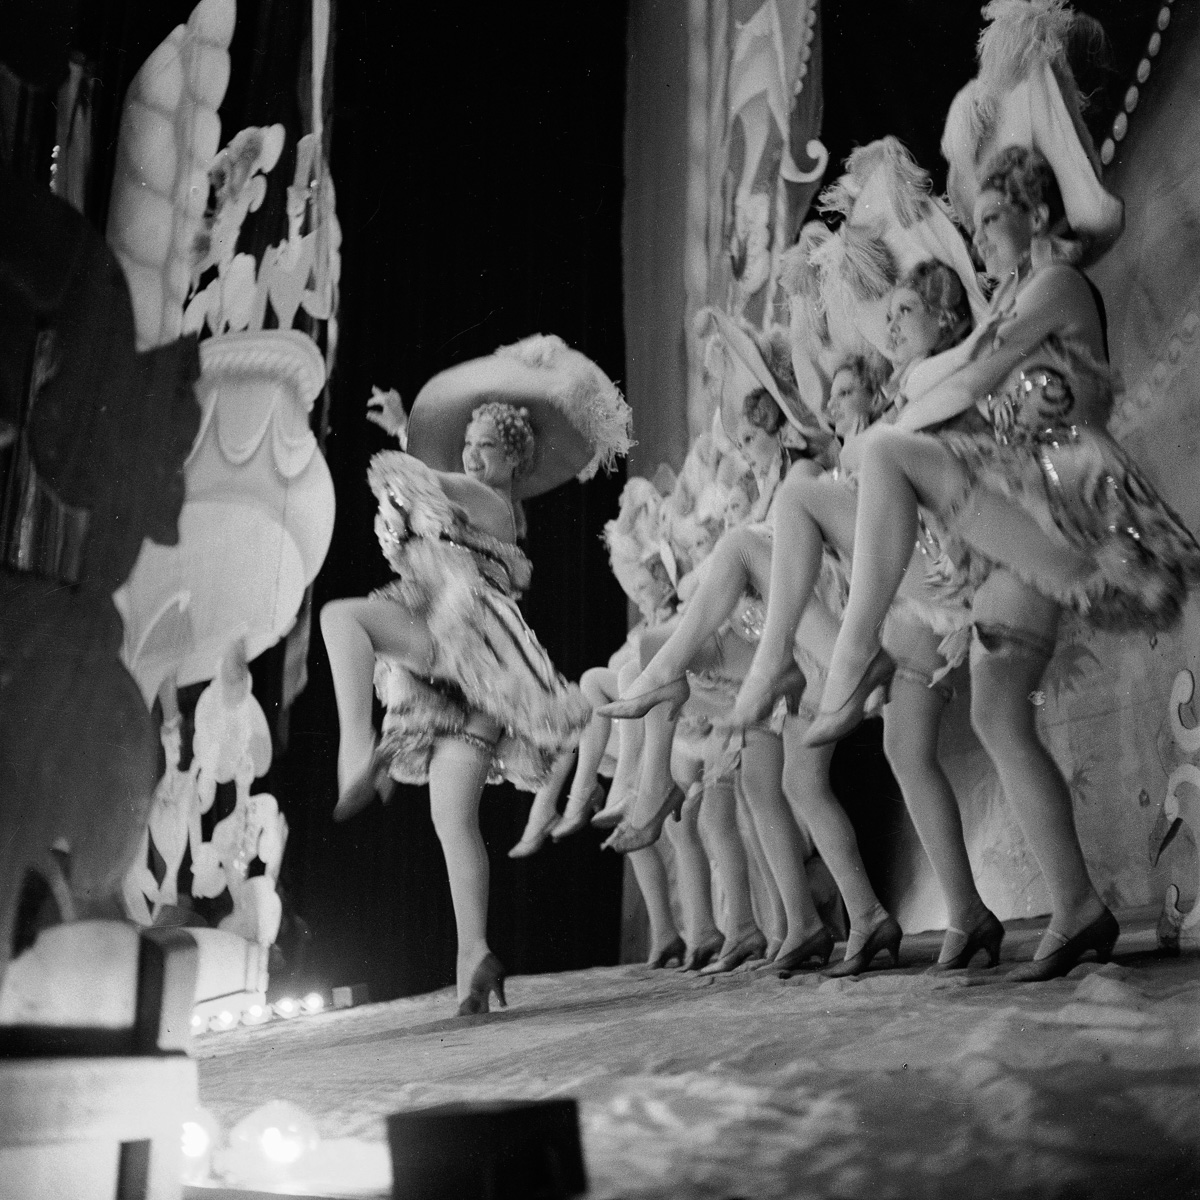 Variety show of the Folies-Bergere. Paris, about 1